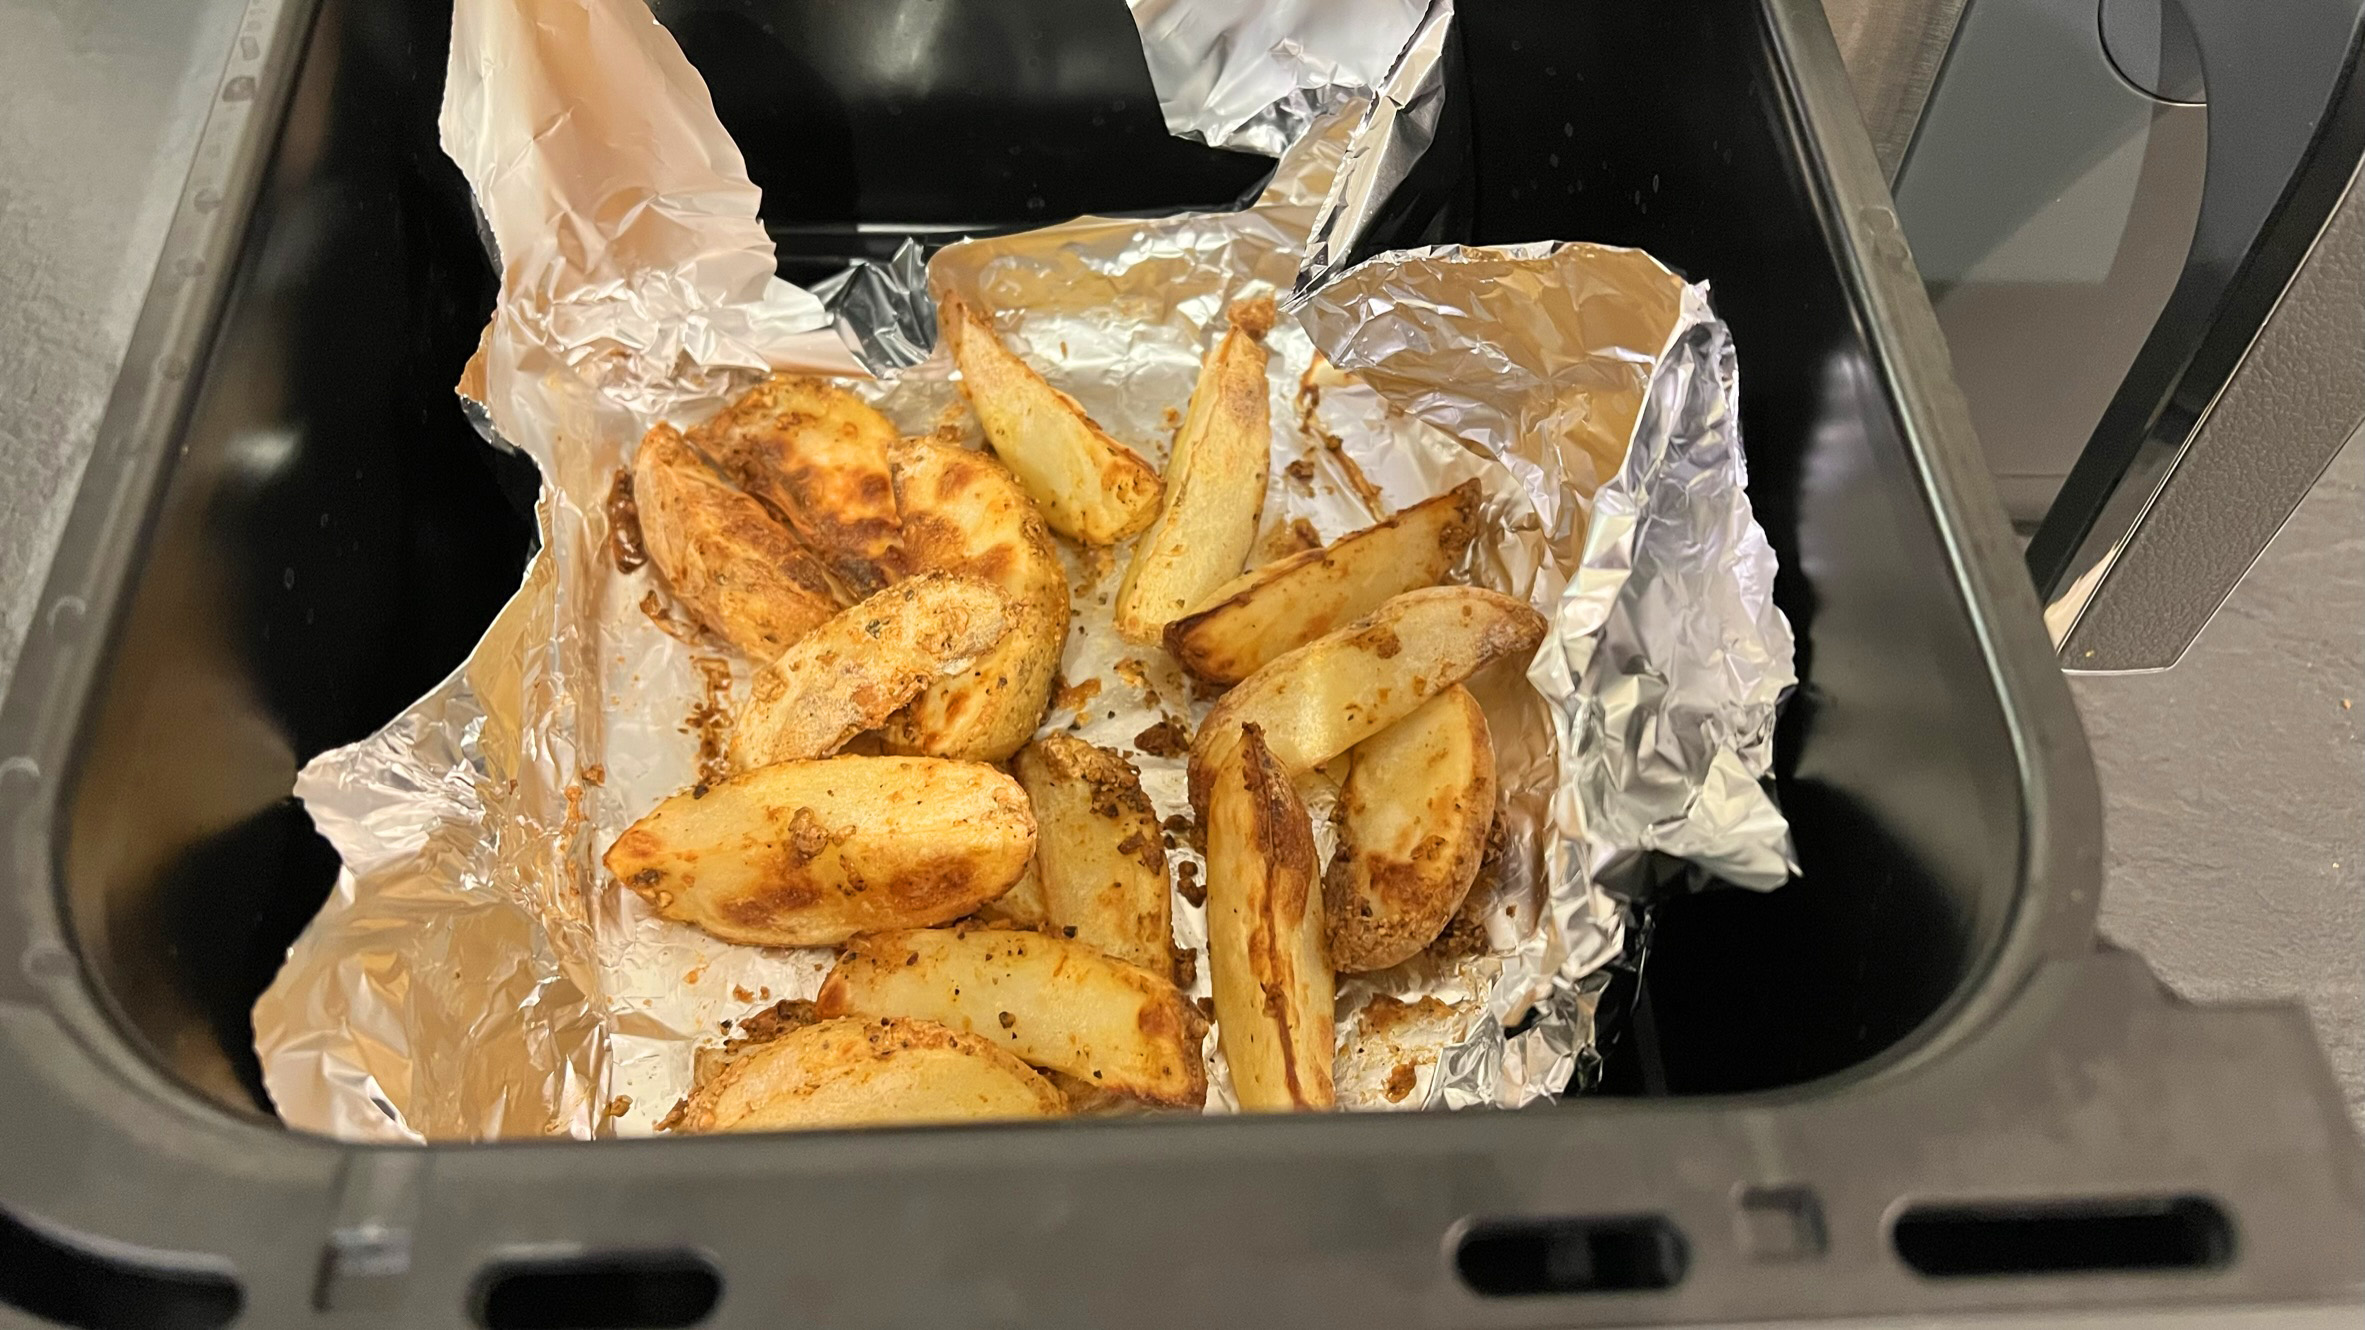 Cooked potato wedges in a deep fryer basket